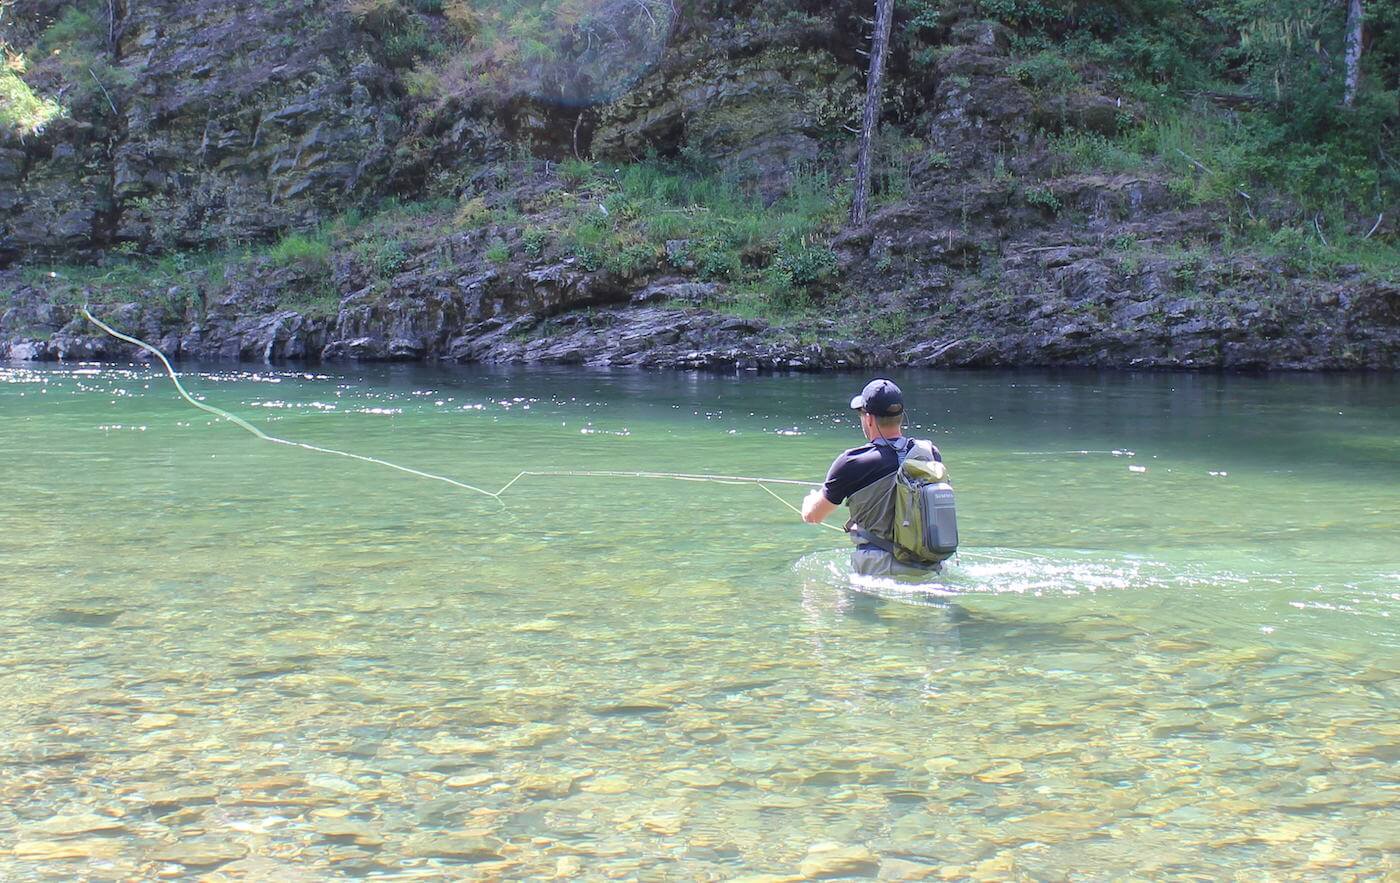 This image shows a fly fisher wading in a river while fishing with a fly rod and reel combo.